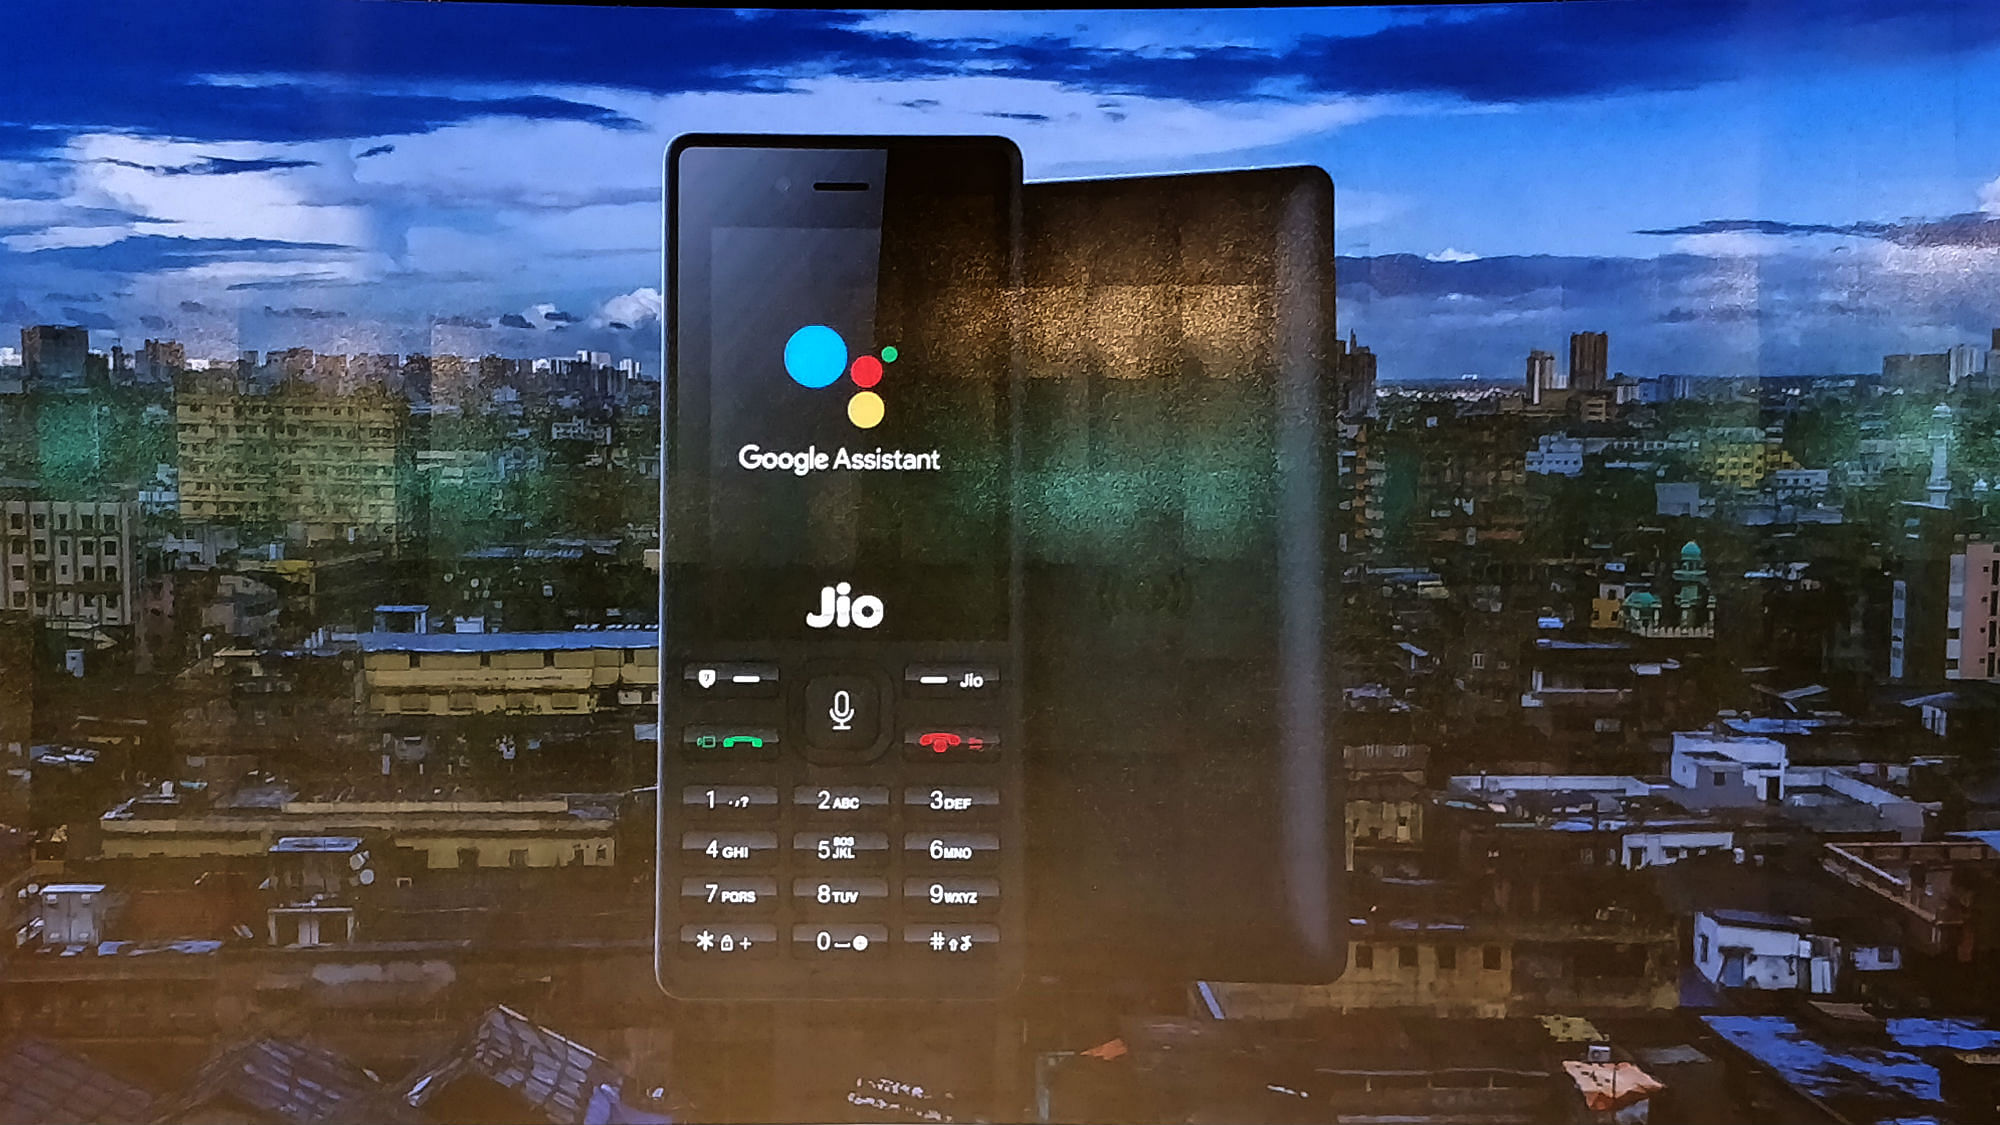 JioPhone also supports Google Assistant.